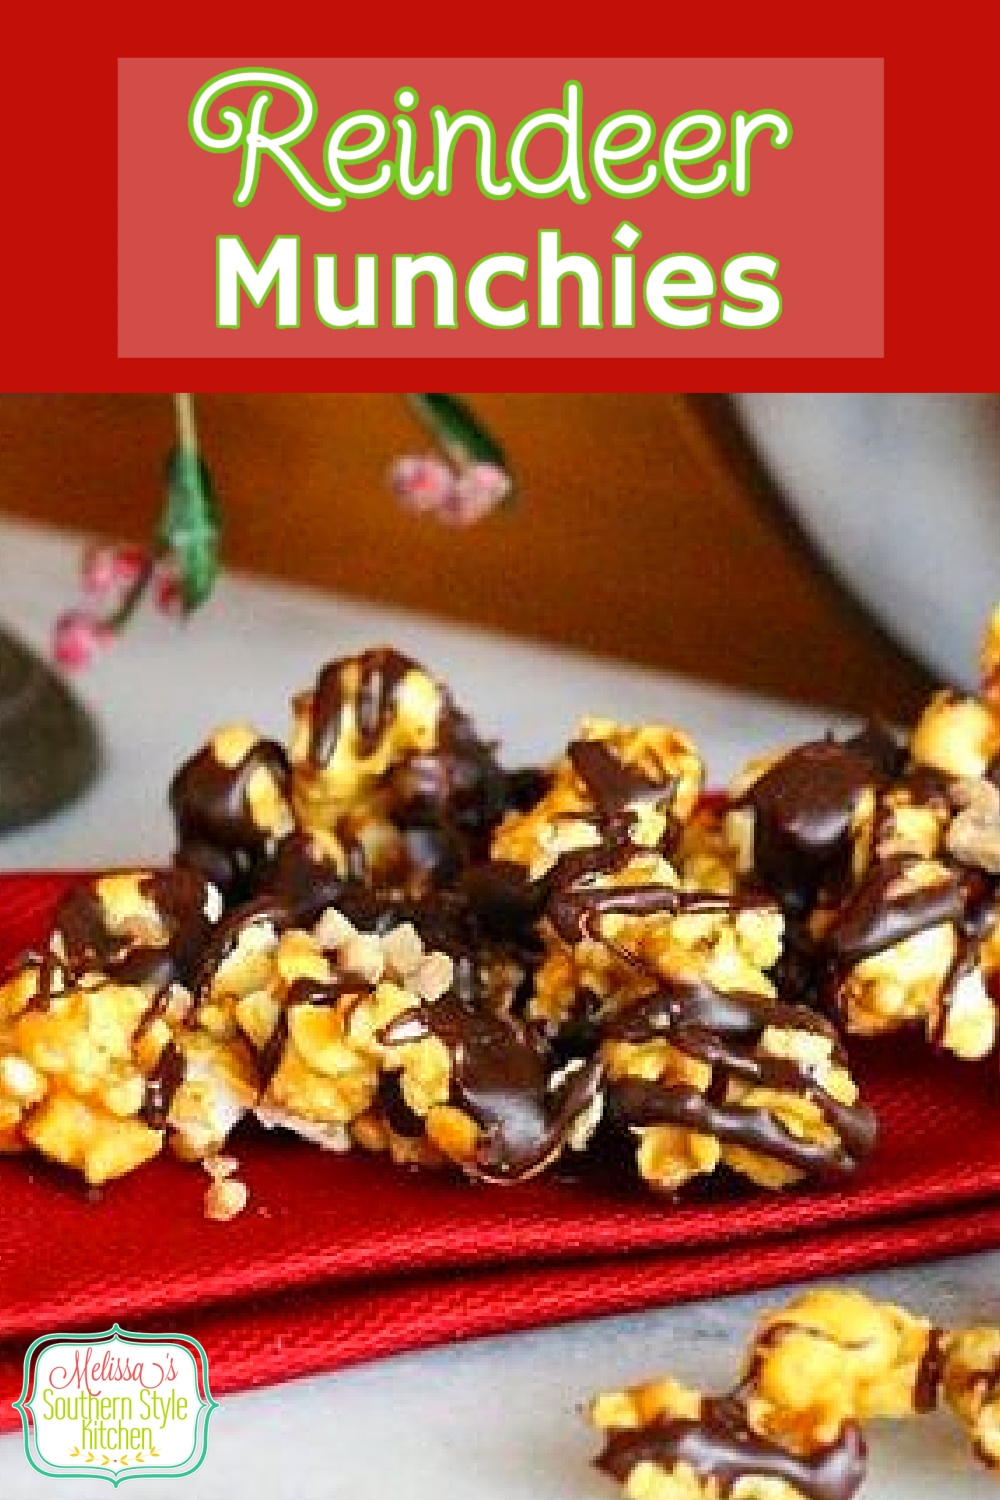 These chocolate drizzled Reindeer Munchies are popular with reindeer and kids of all ages! #caramelcorn #chocolatedrizzledpopcorn #popcornrecipes #holidayrecipes #moosemunch #caramel #sweets #desserts #dessertfoodrecipes #dessertrecipes #chocolate #homemade #southernfood #southernrecipes #christmas #christmasrecipes #melissassouthernstylekitchen